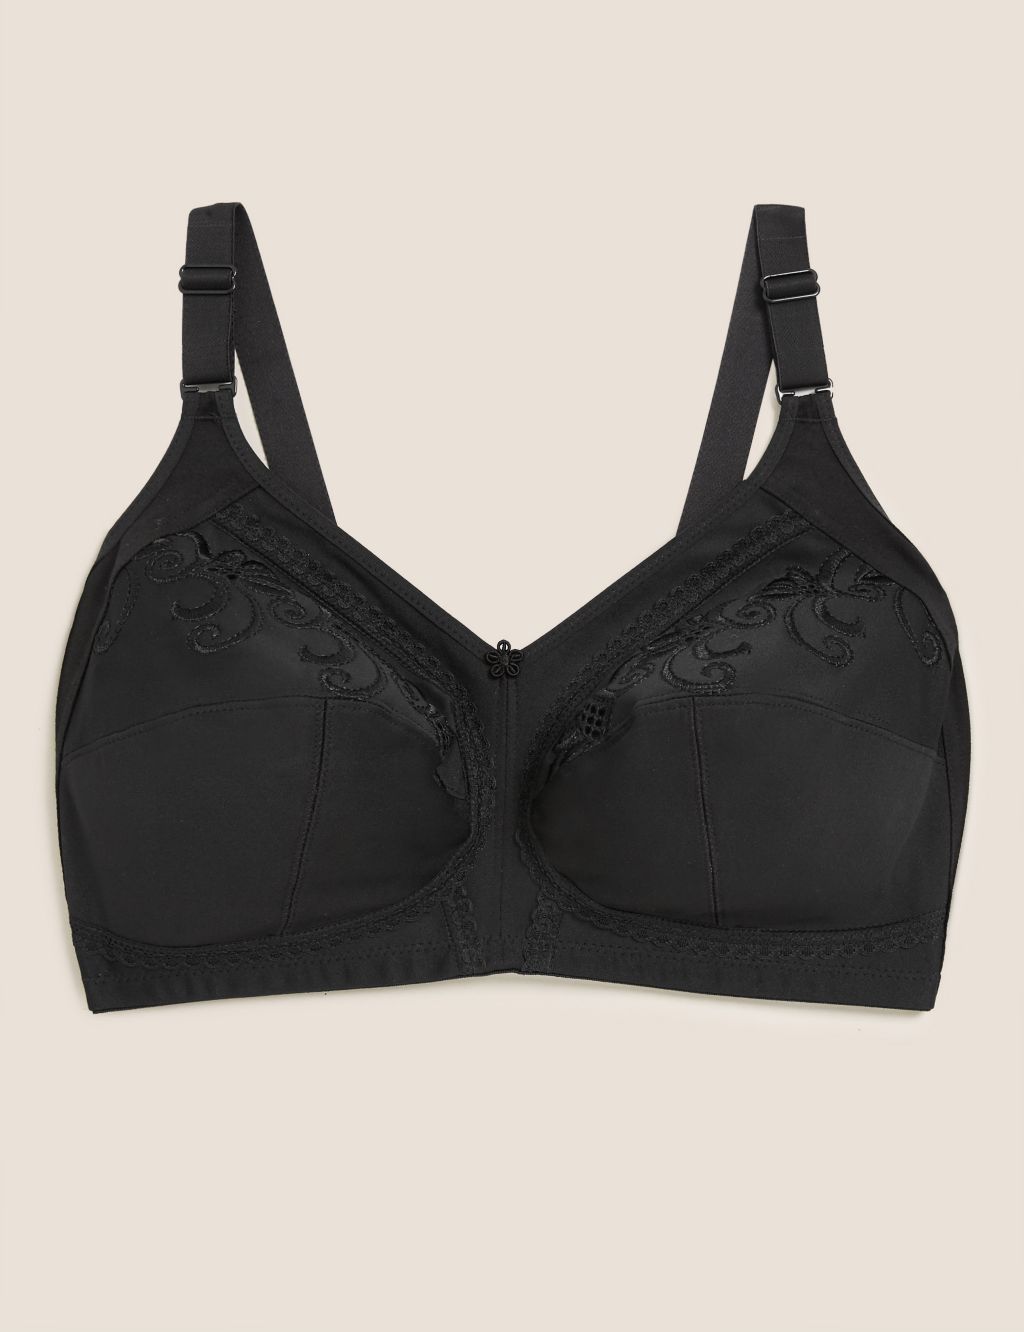 Total Support Embroidered Full Cup Bra B-H image 2